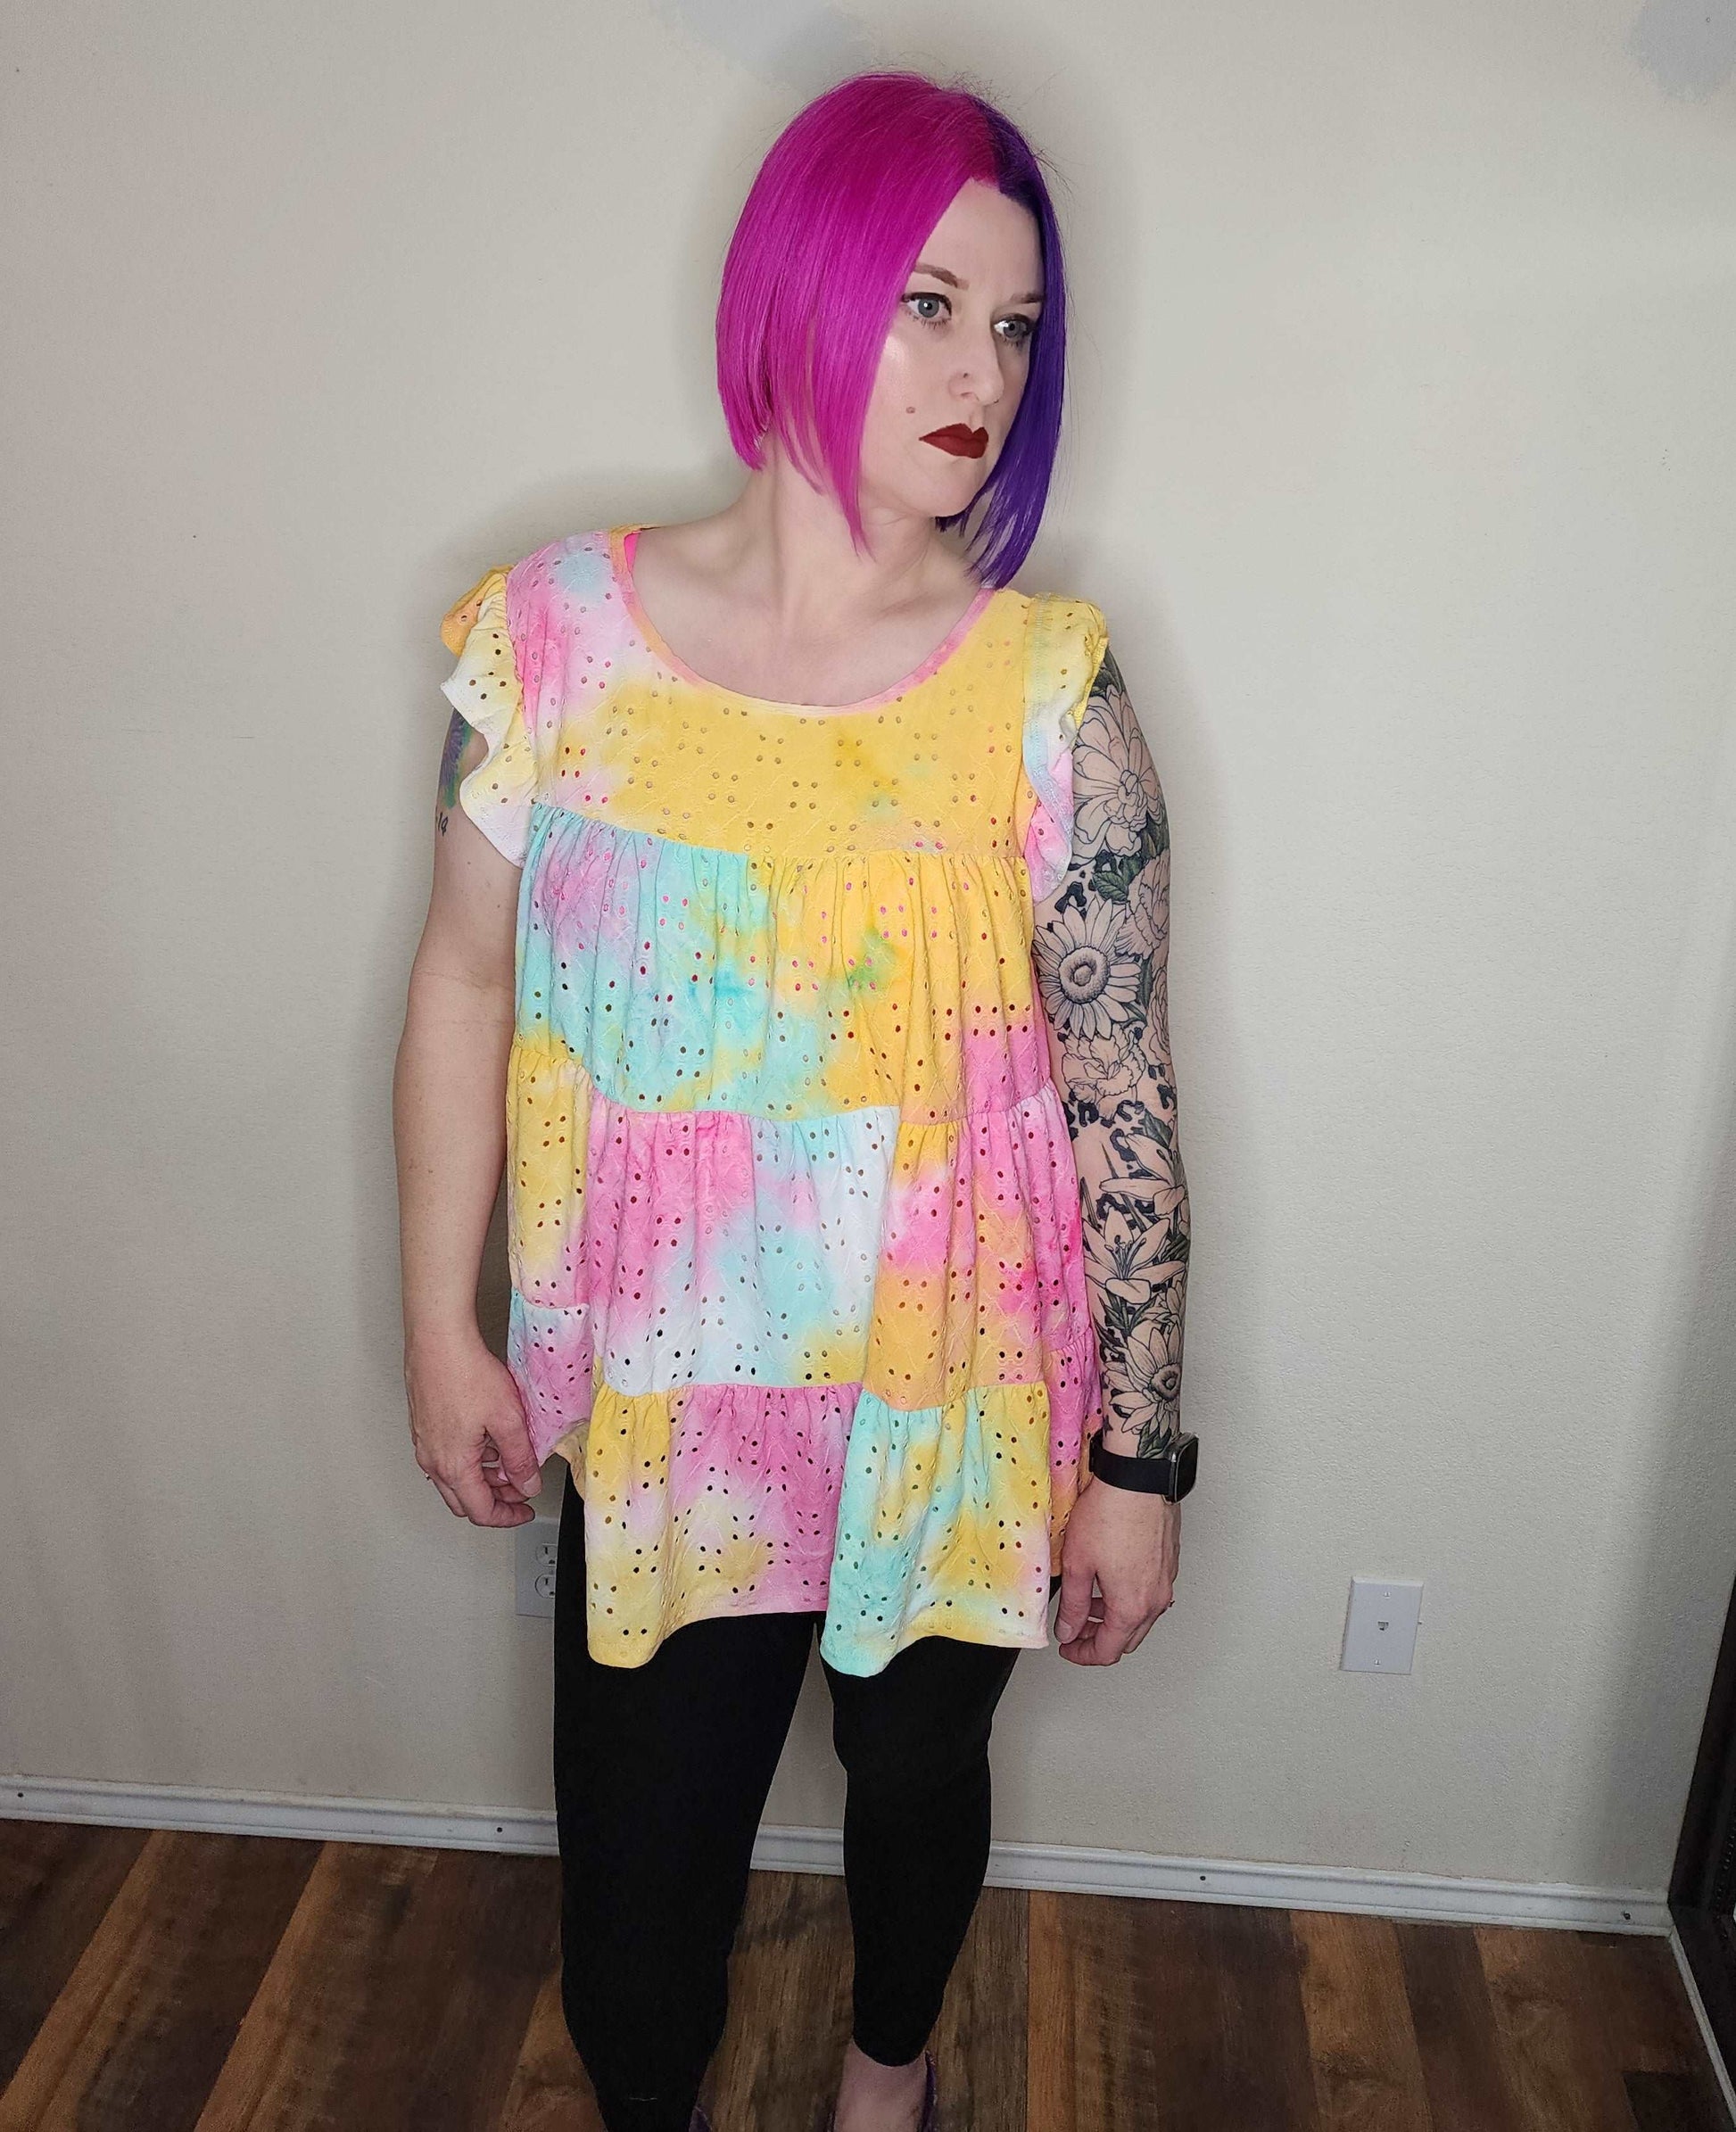 Yellow pink blue and white tie dye baby doll style top.